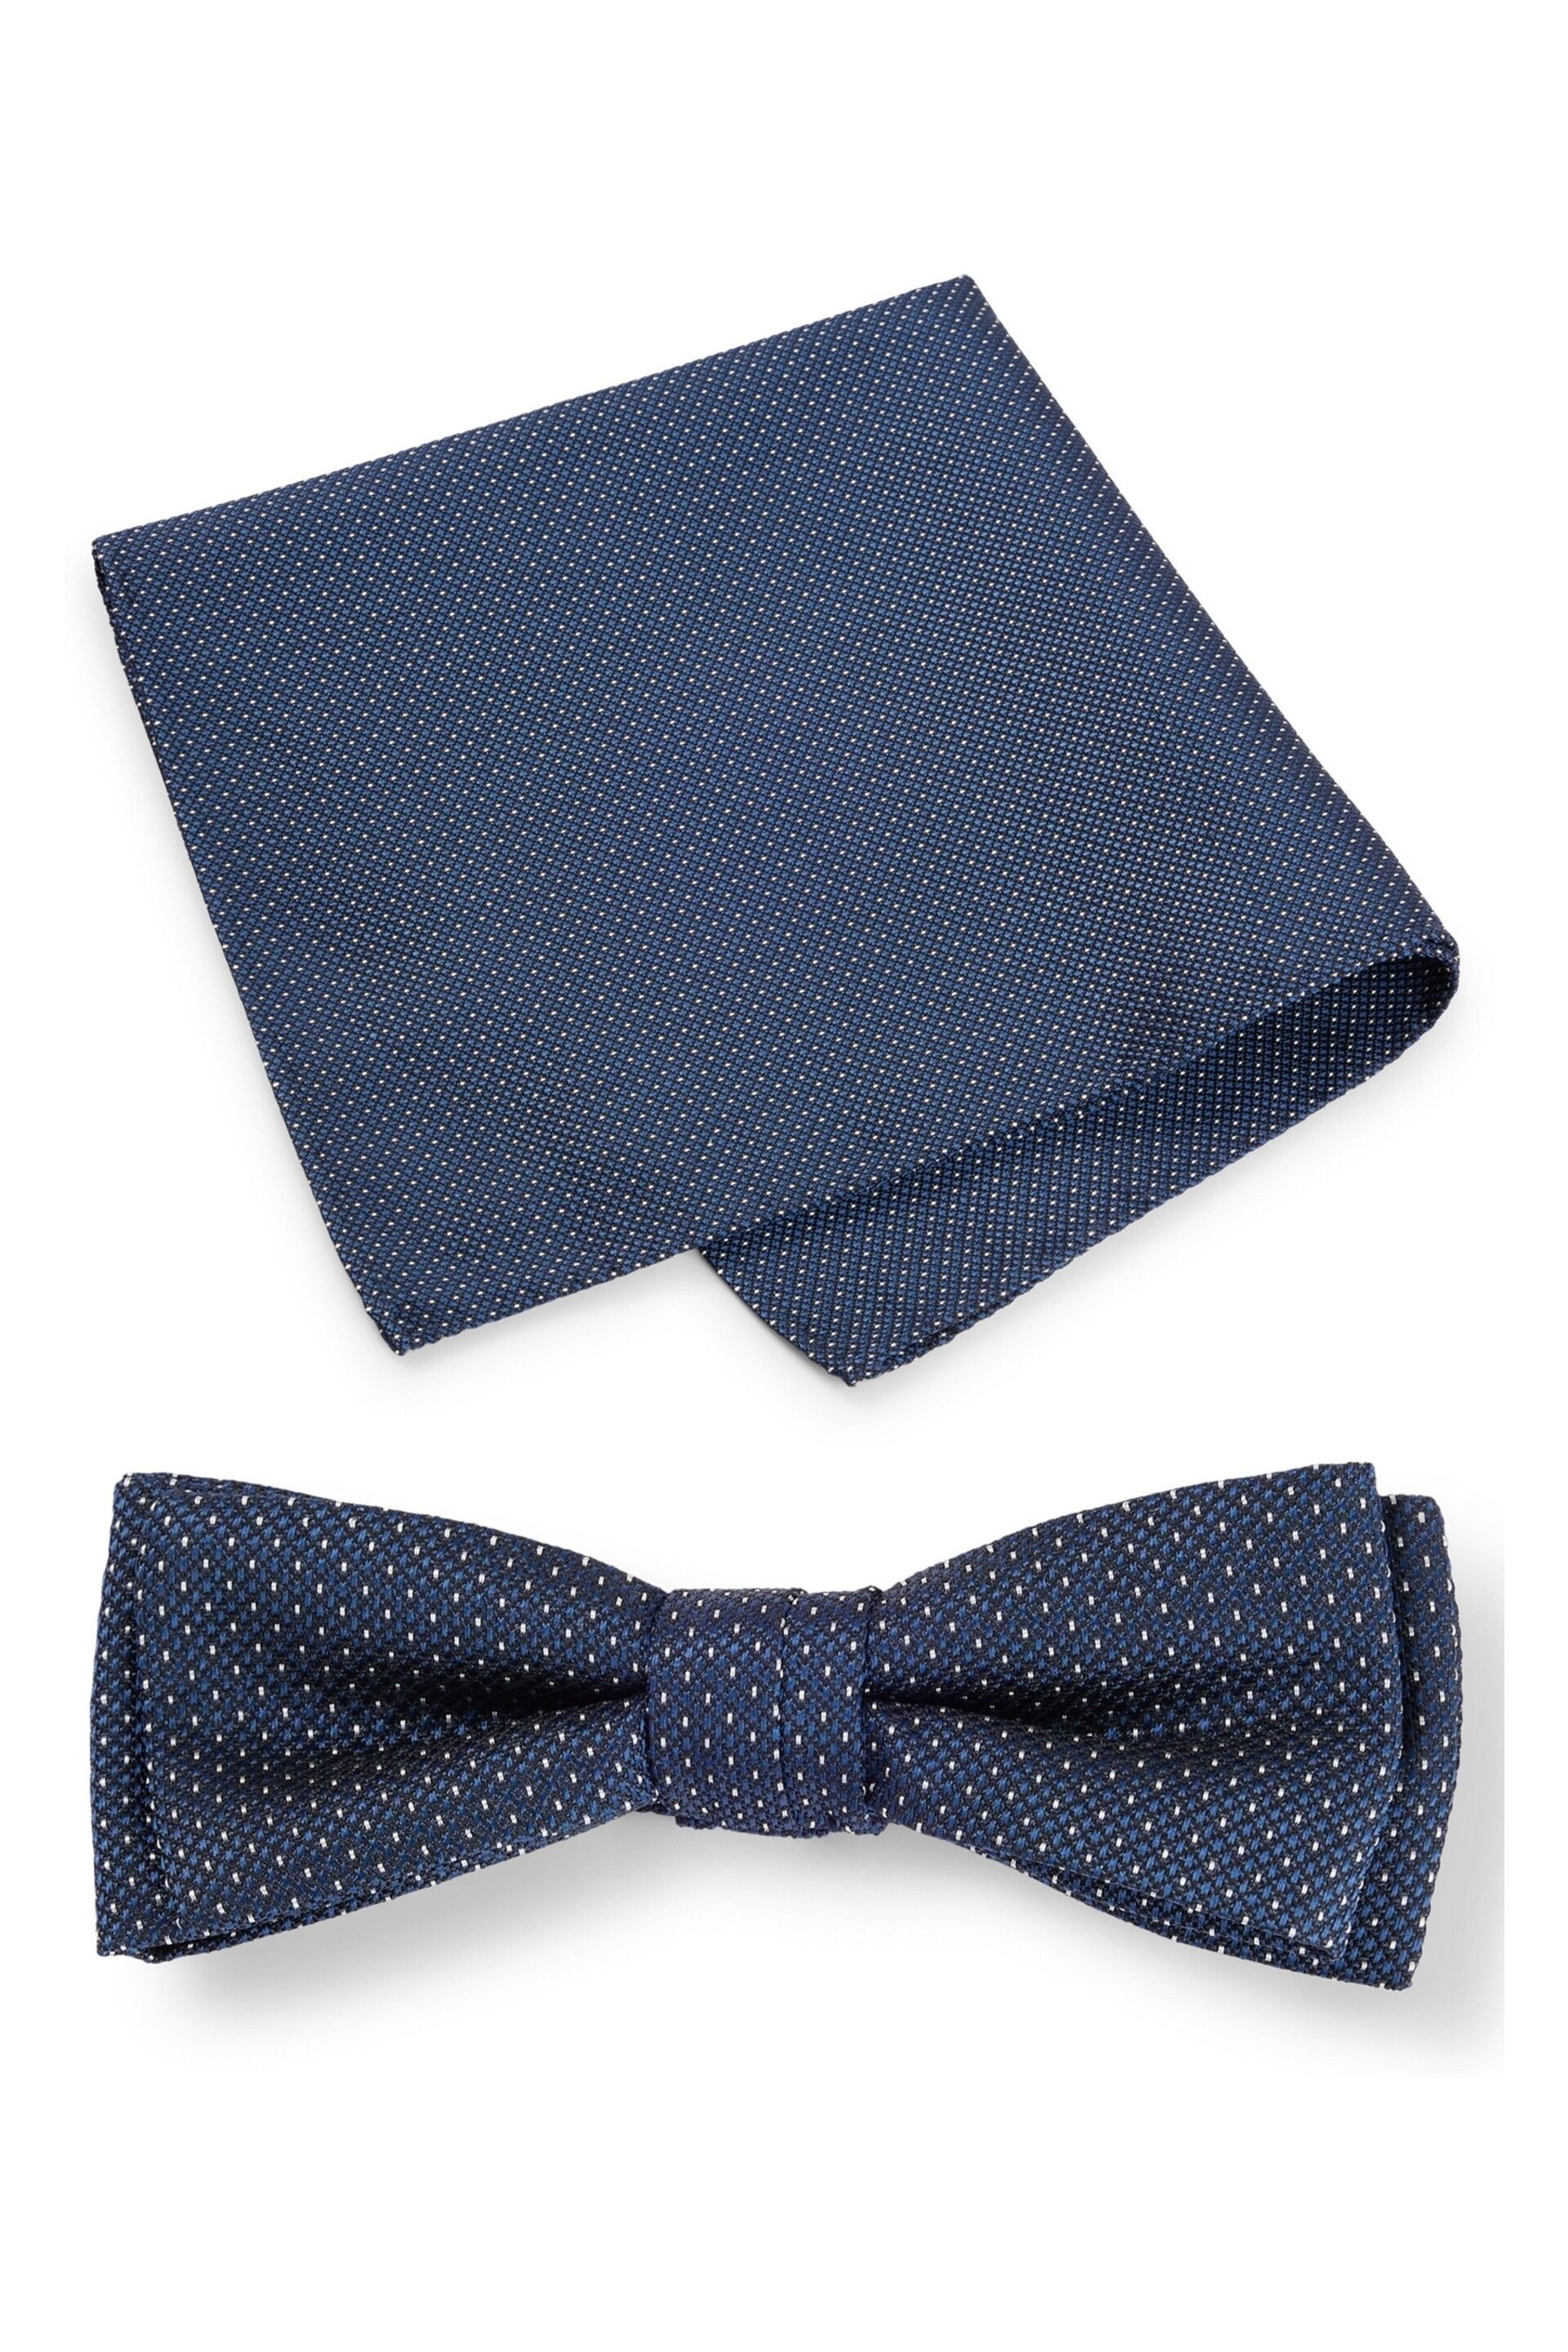 BOSS Blue Silk-Blend Jacquard Bow Tie and Pocket Square - Image 1 of 3